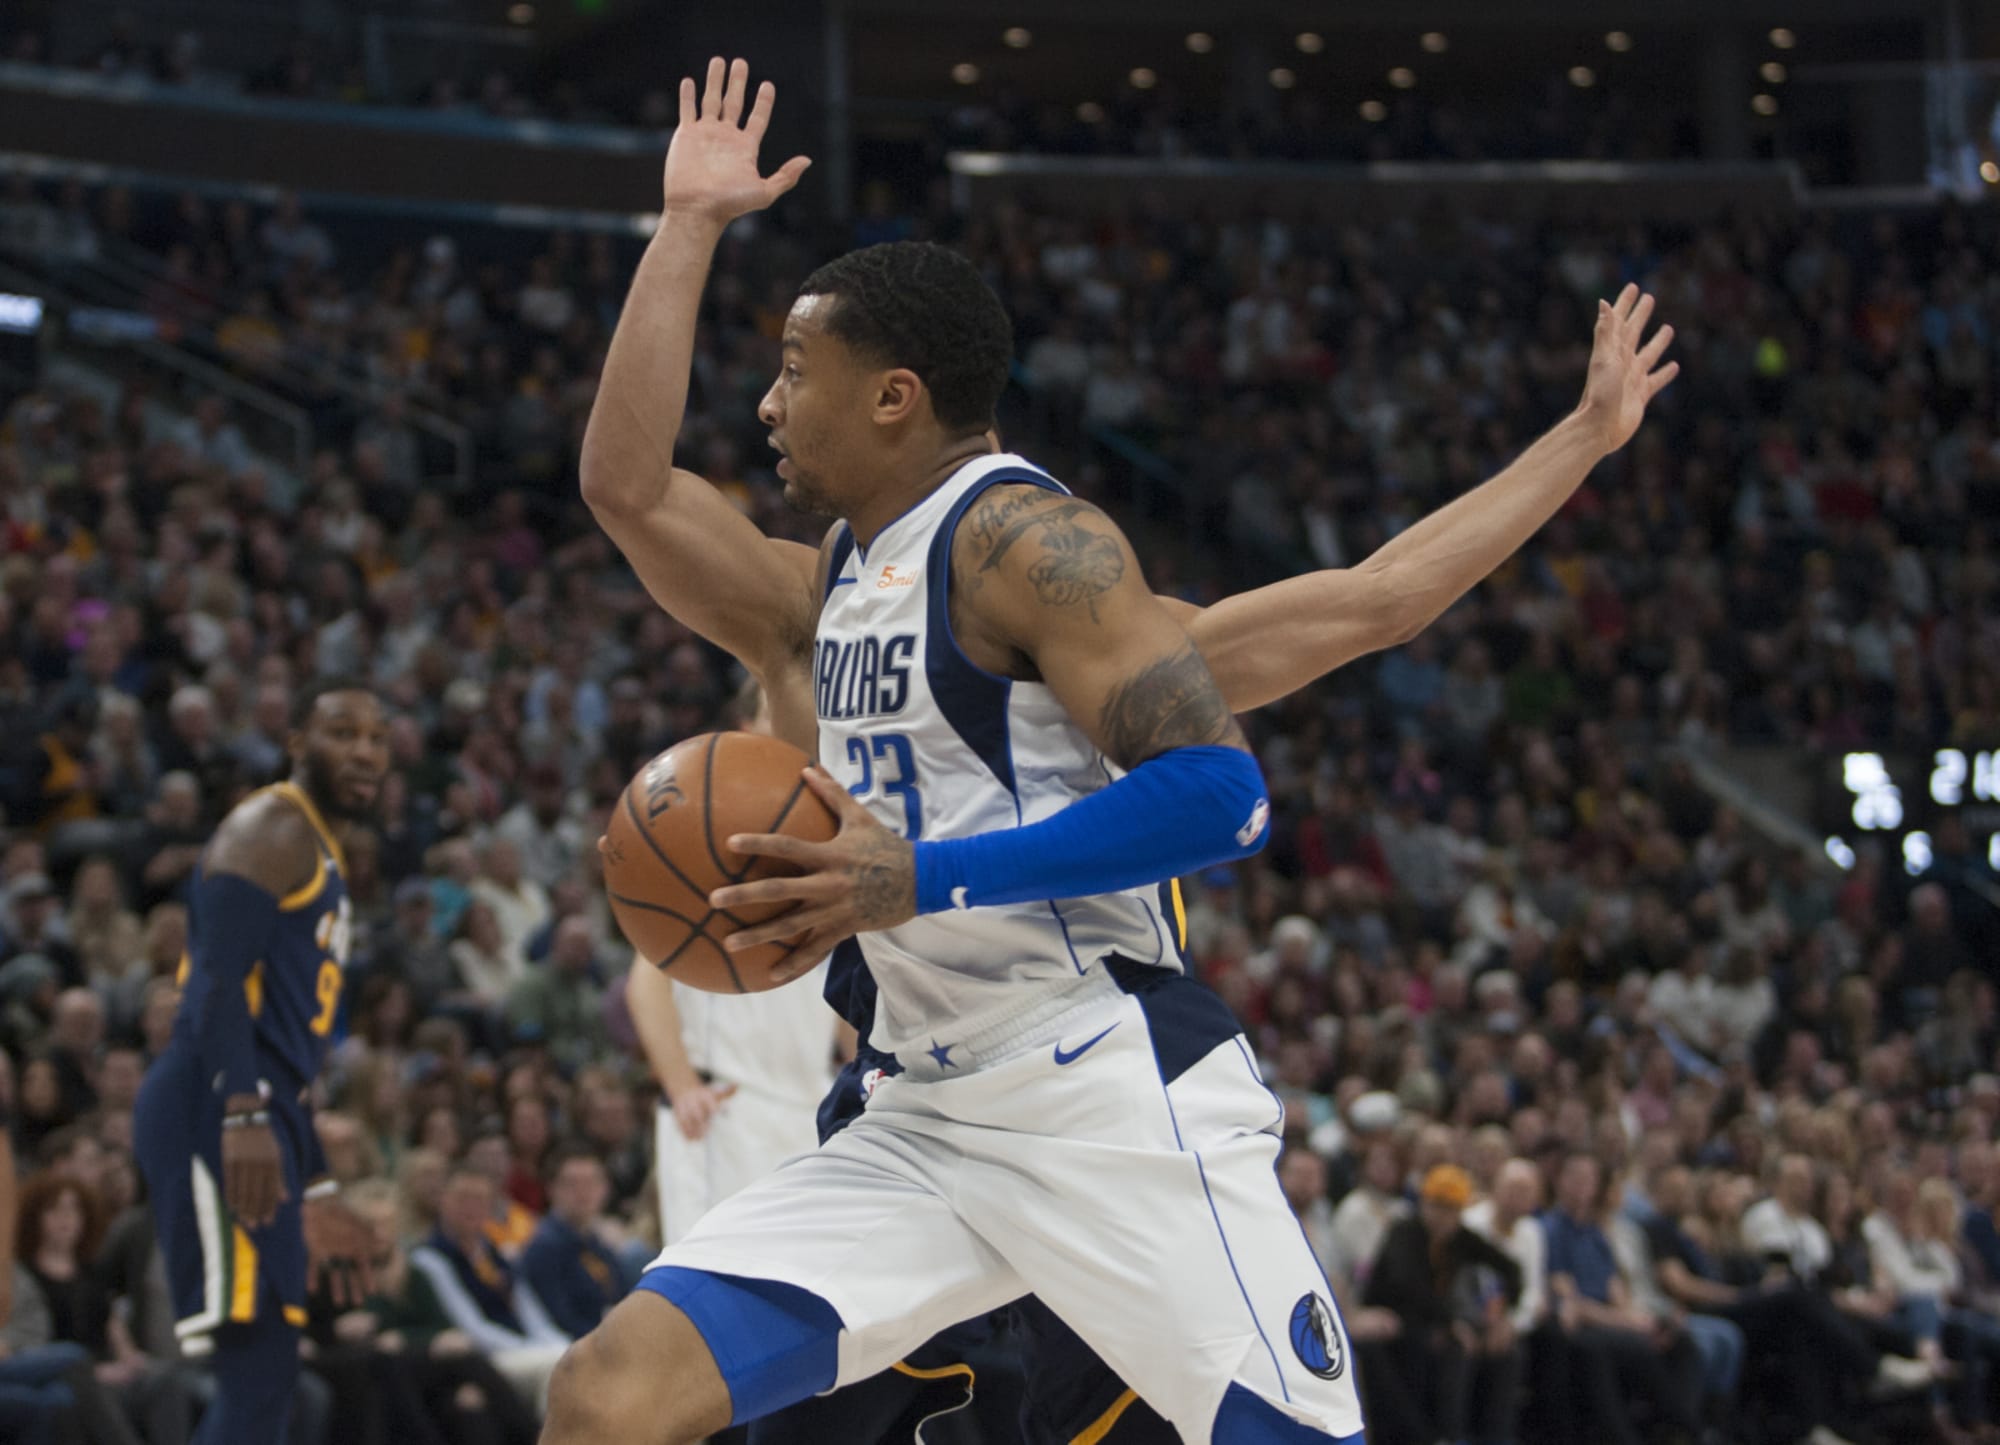 Trey Burke is not good enough to be a distraction - Mavs Moneyball